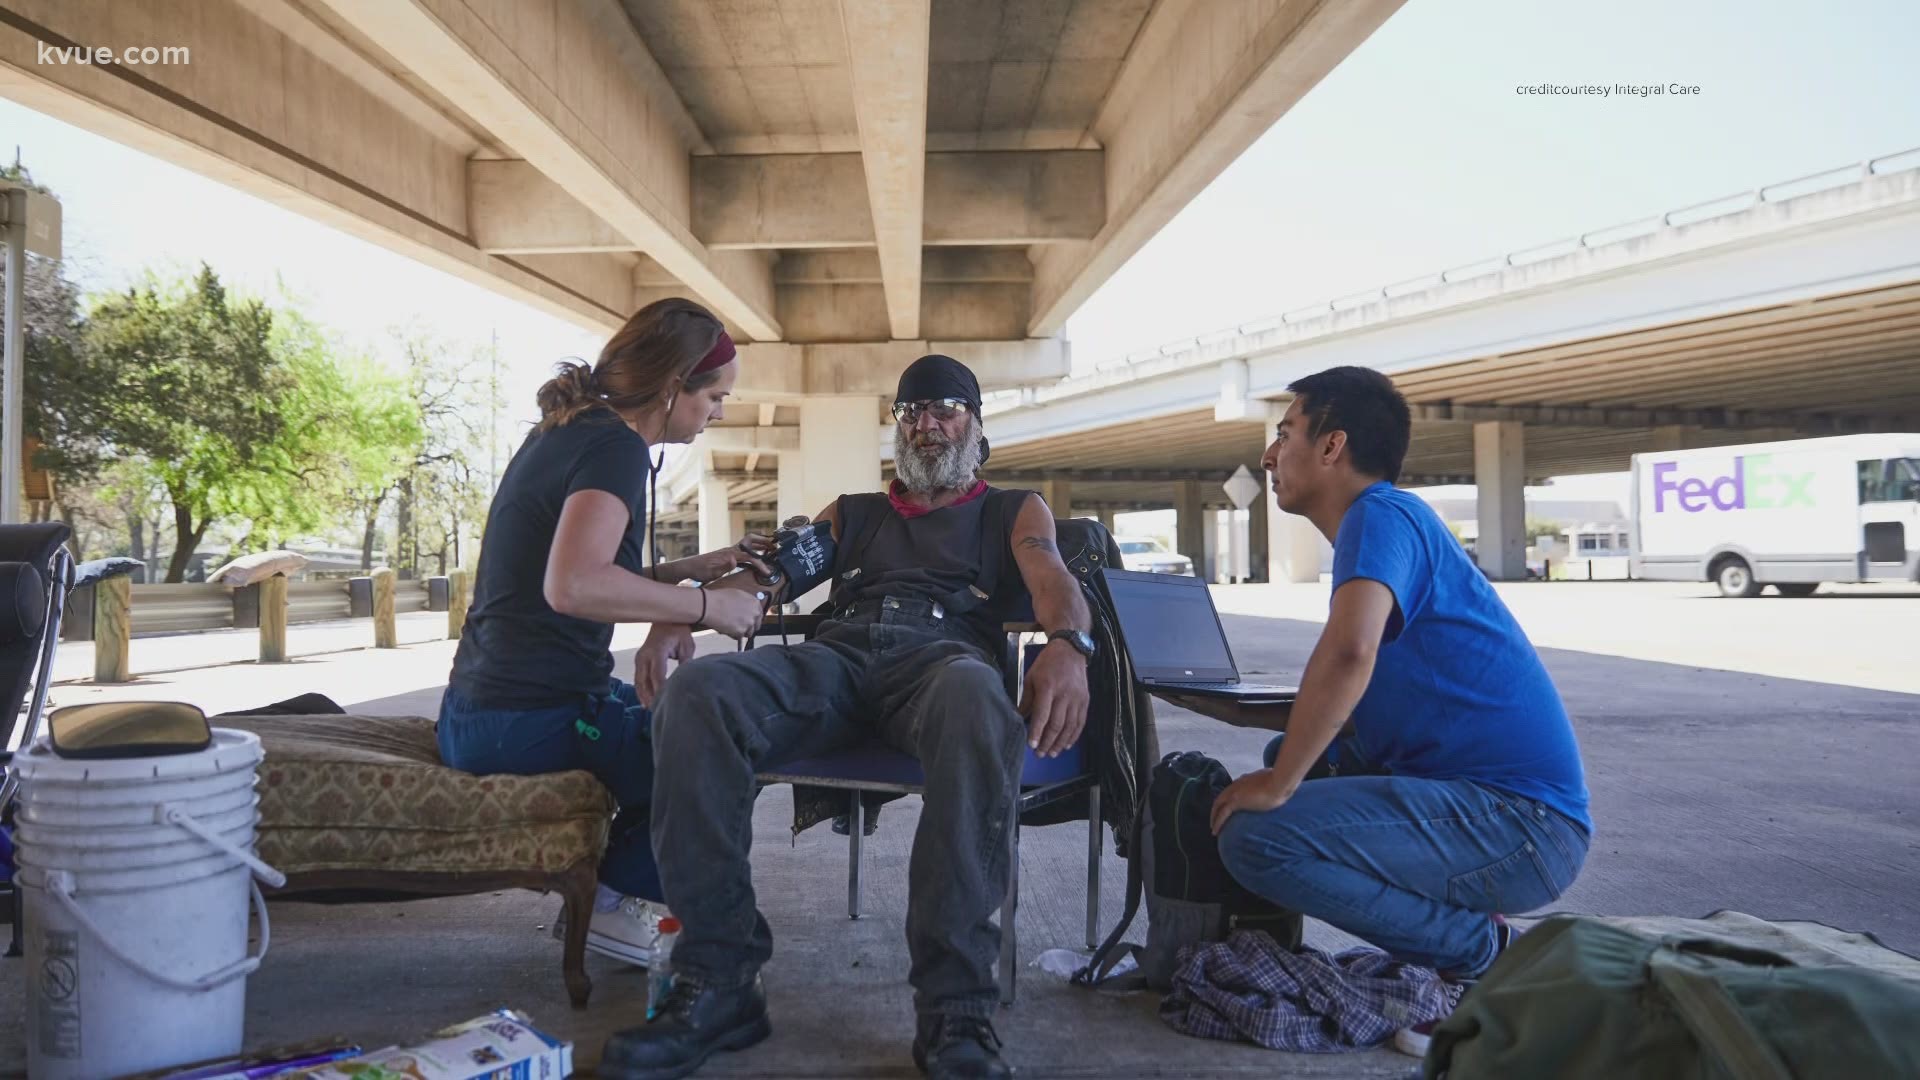 For people experiencing homelessness, missing proof of identity can be a major barrier to receiving critical services. UT Dell Medical School has a solution.